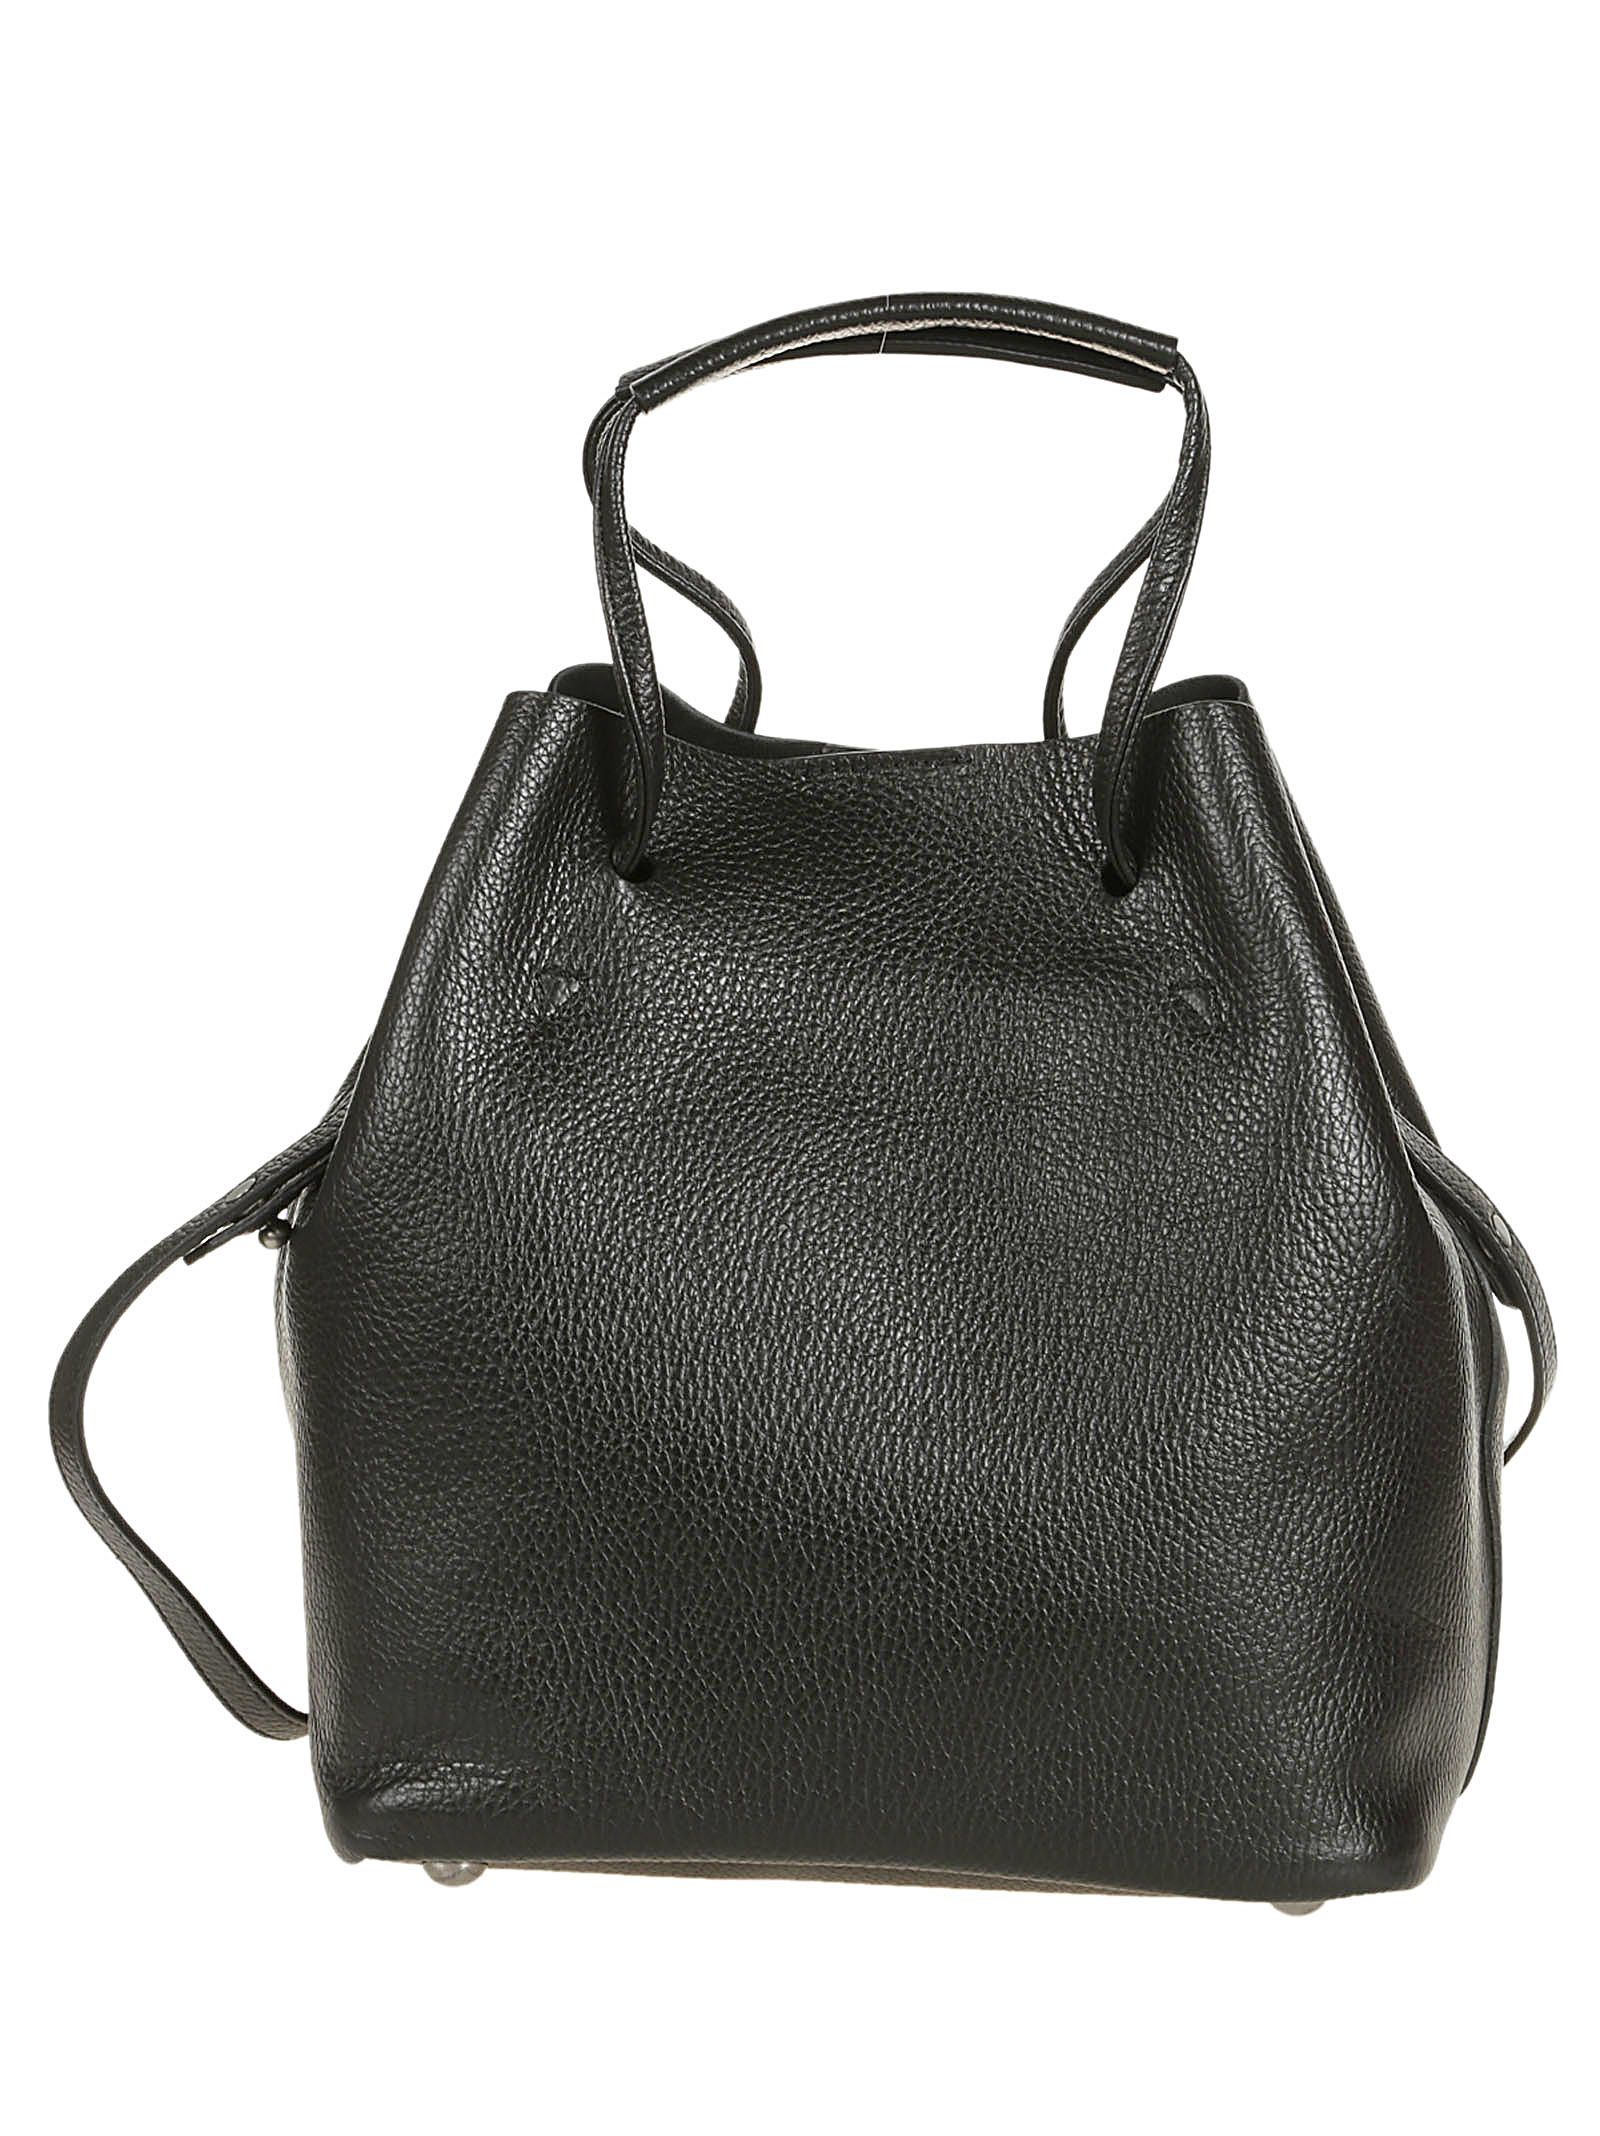 italist | Best price in the market for Hogan Hogan Iconic Tote - Black ...